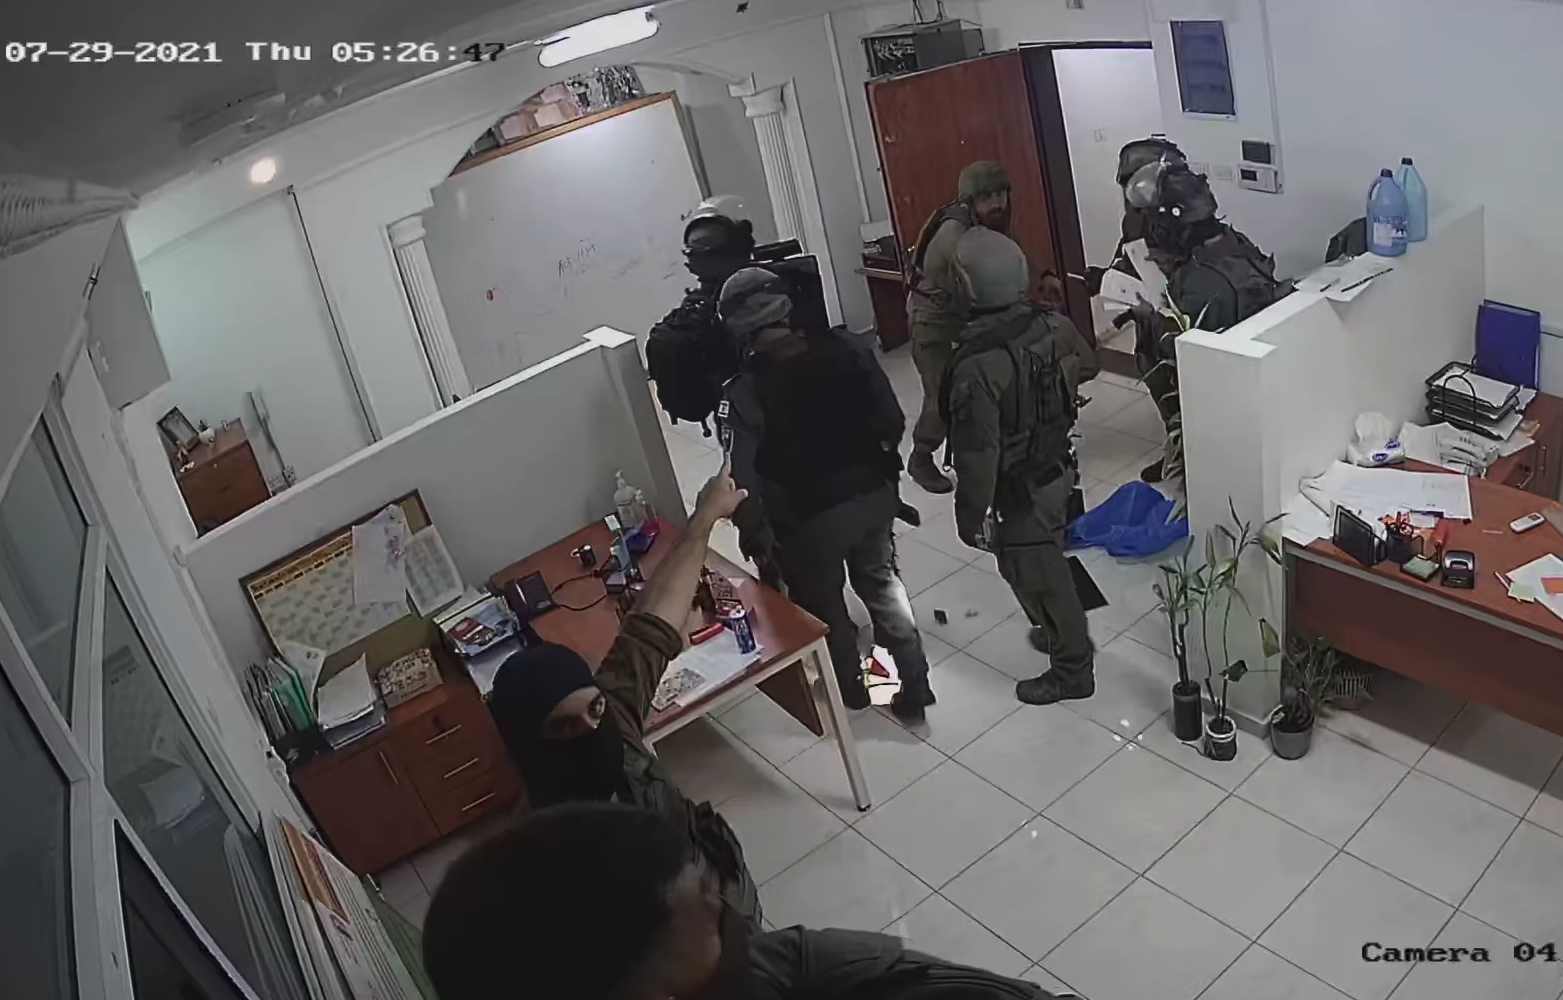 Israeli soldiers confiscate computer equipment and client files in a raid on the offices of Defense for Children International - Palestine, Al-Bireh, West Bank, July 29, 2021. (DCI-P)